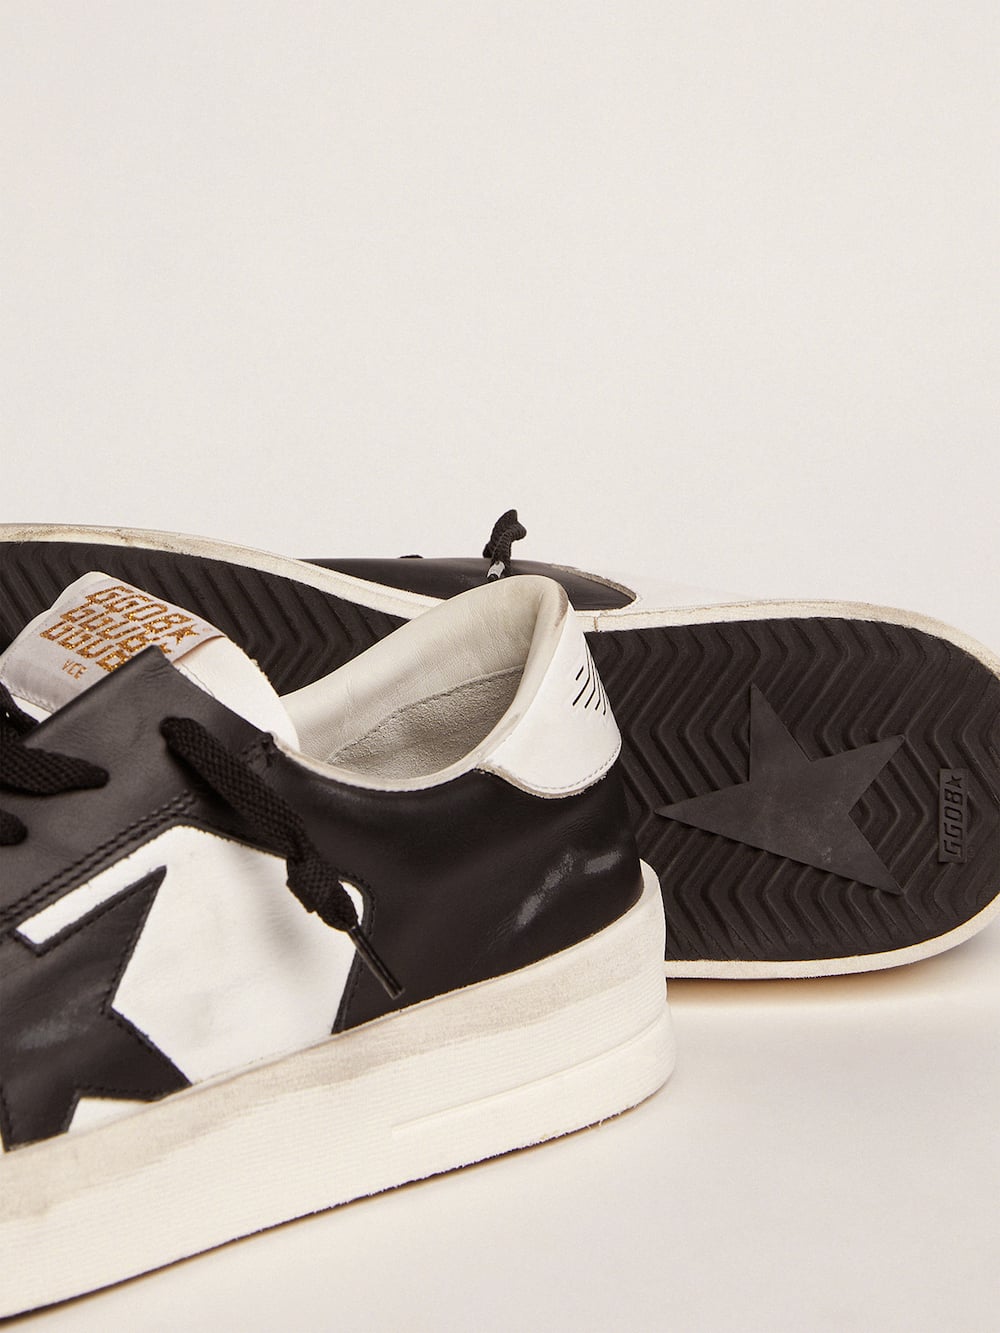 Golden Goose - Women's Stardan in white and black leather in 